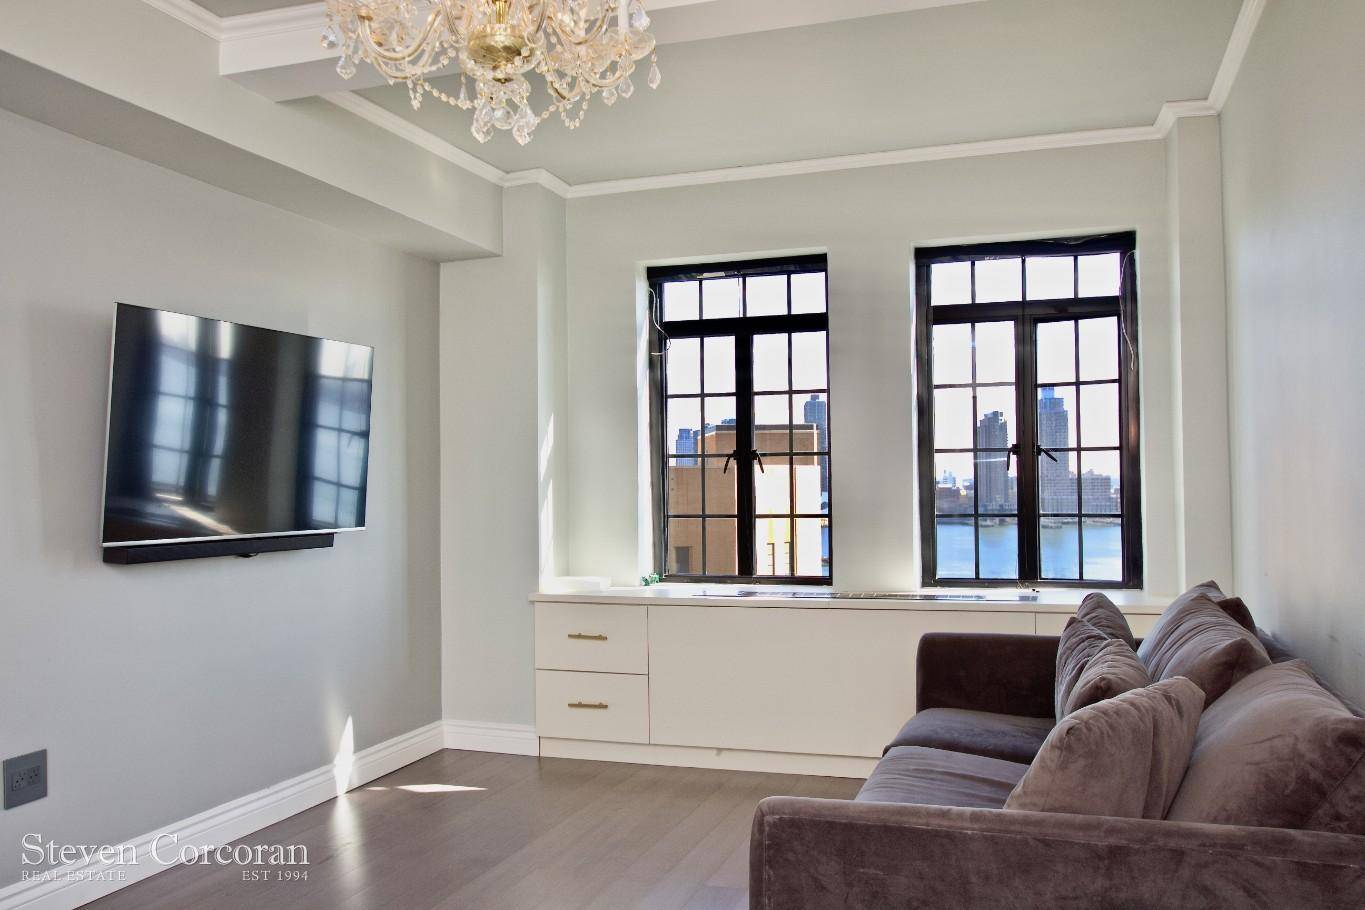 NEW LISTING IN WINDSOR TOWERExquisitely gut renovated 1 bed unit featuring amazing water views and bespoke interior.